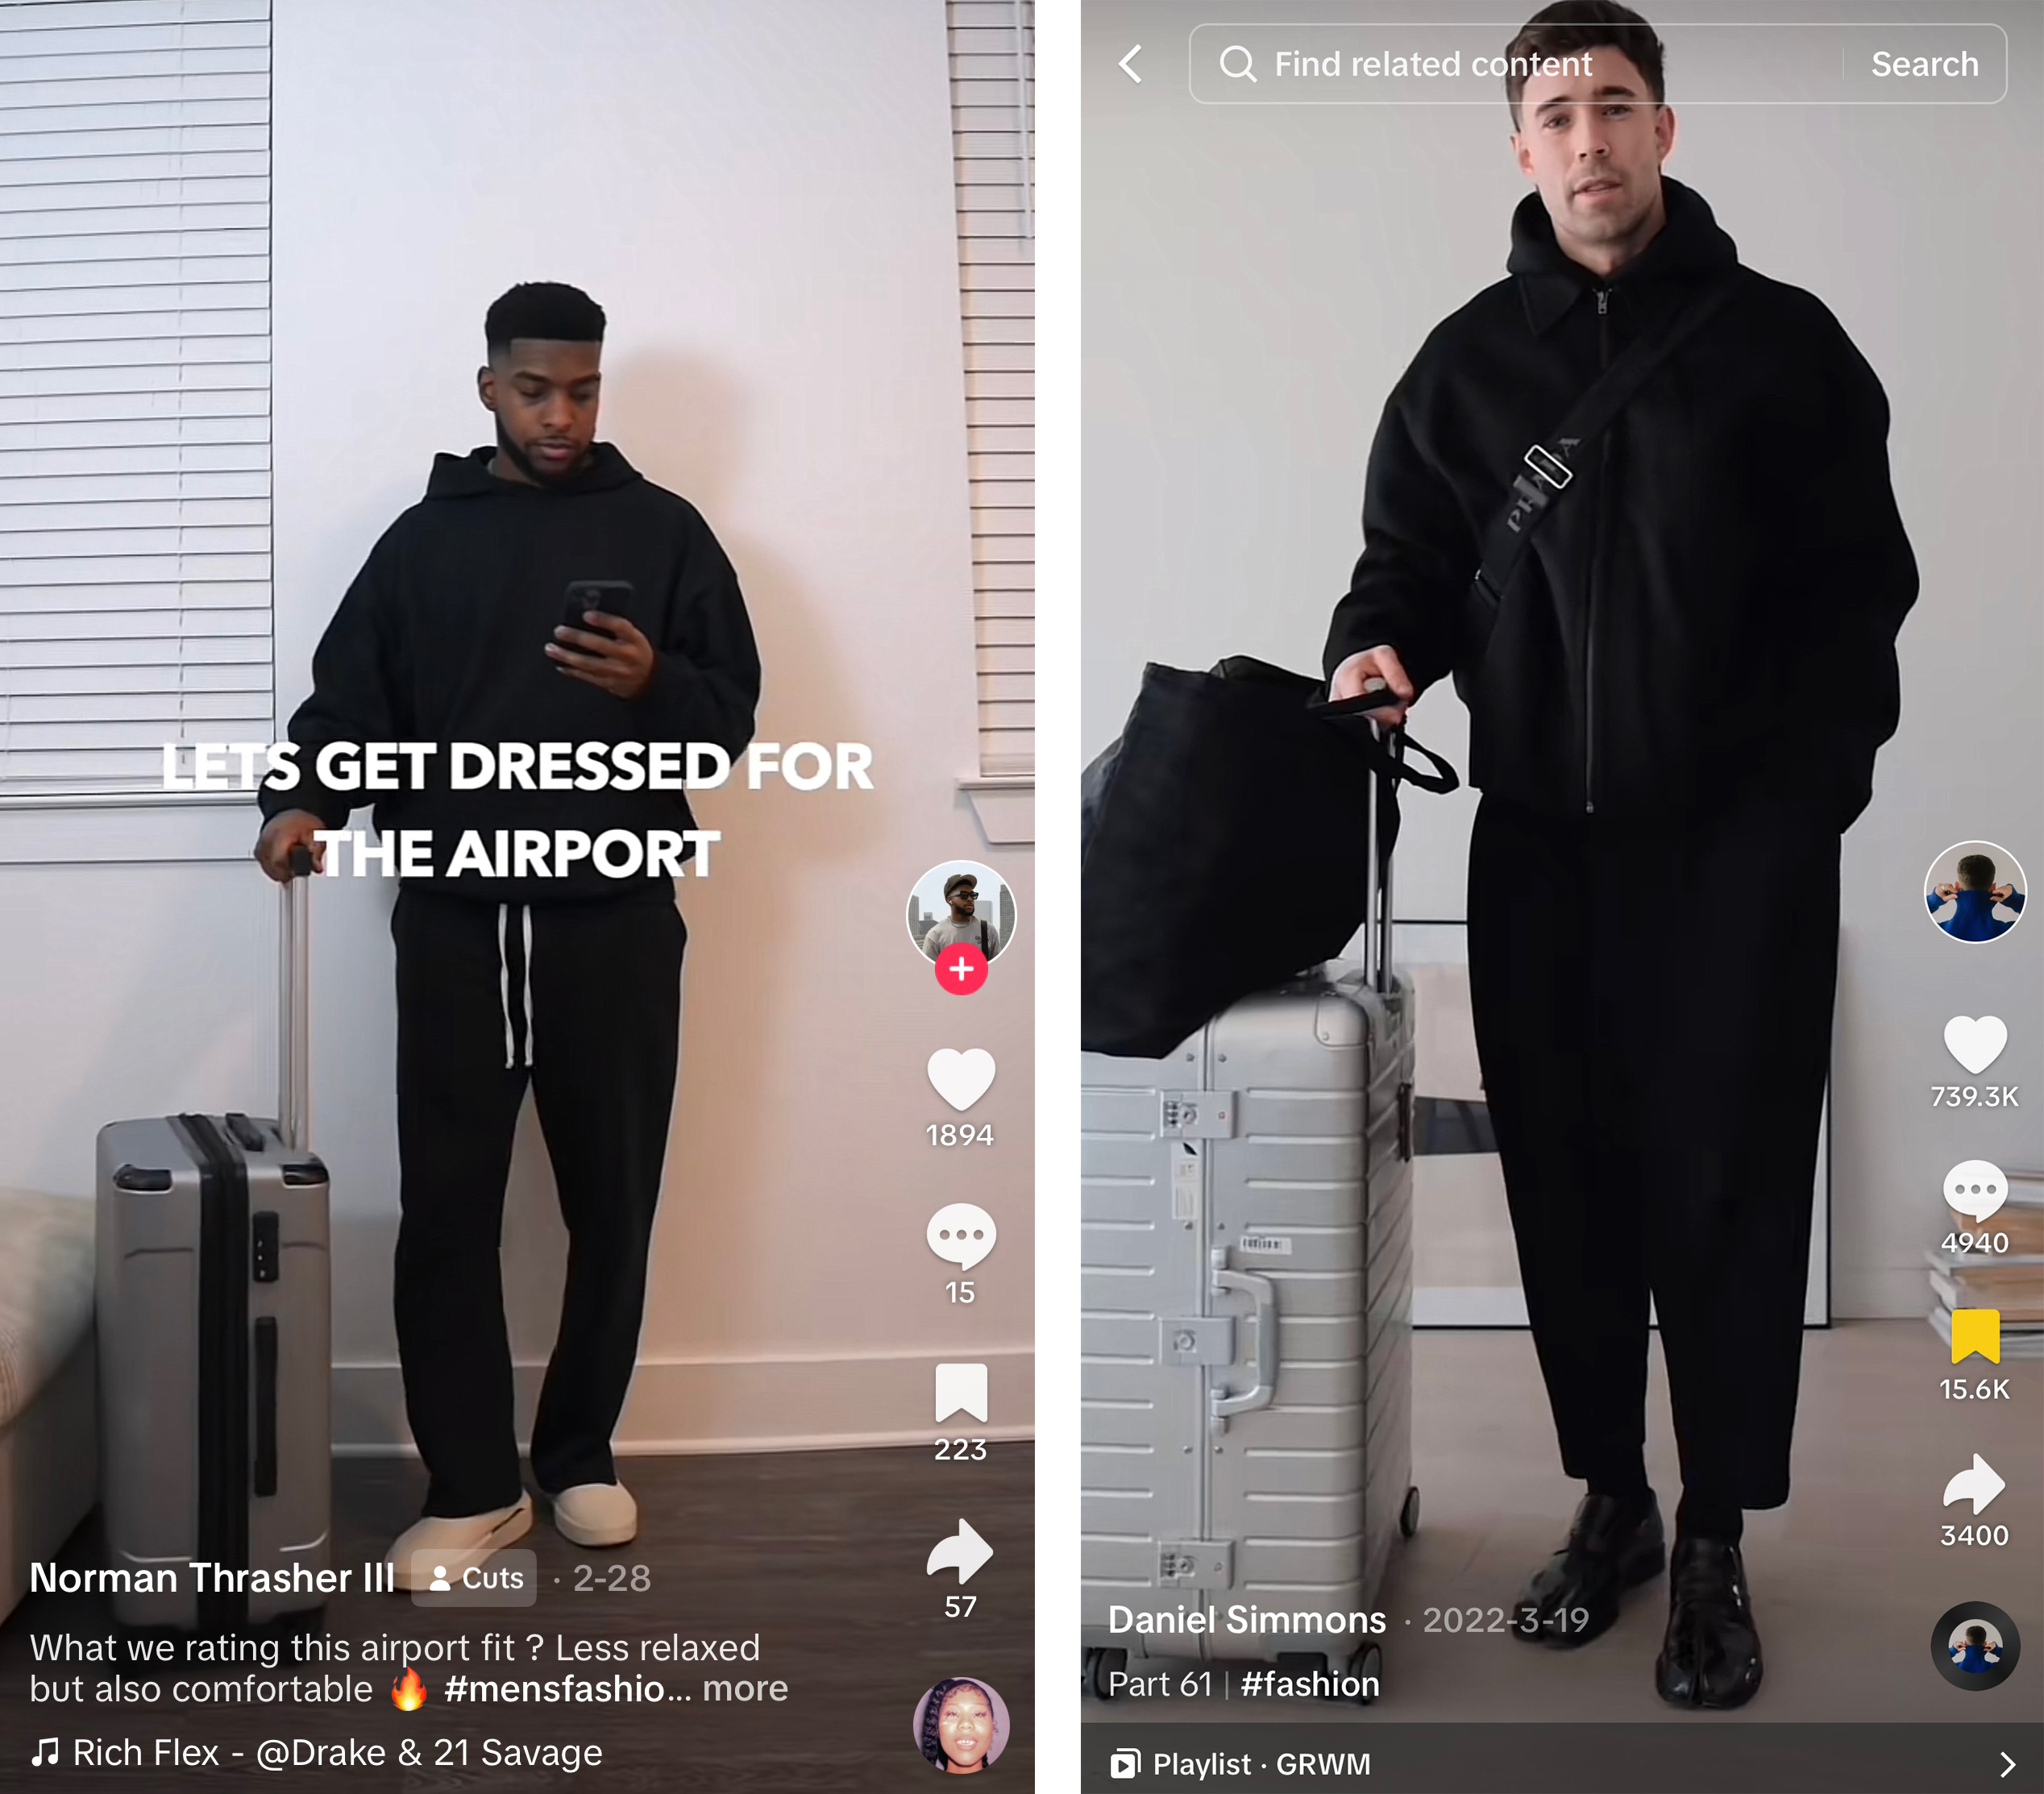 This photo is a collage of two screenshots from TikTok, both showing men dressed in black outfits consisting of hoodies and sweatpants.